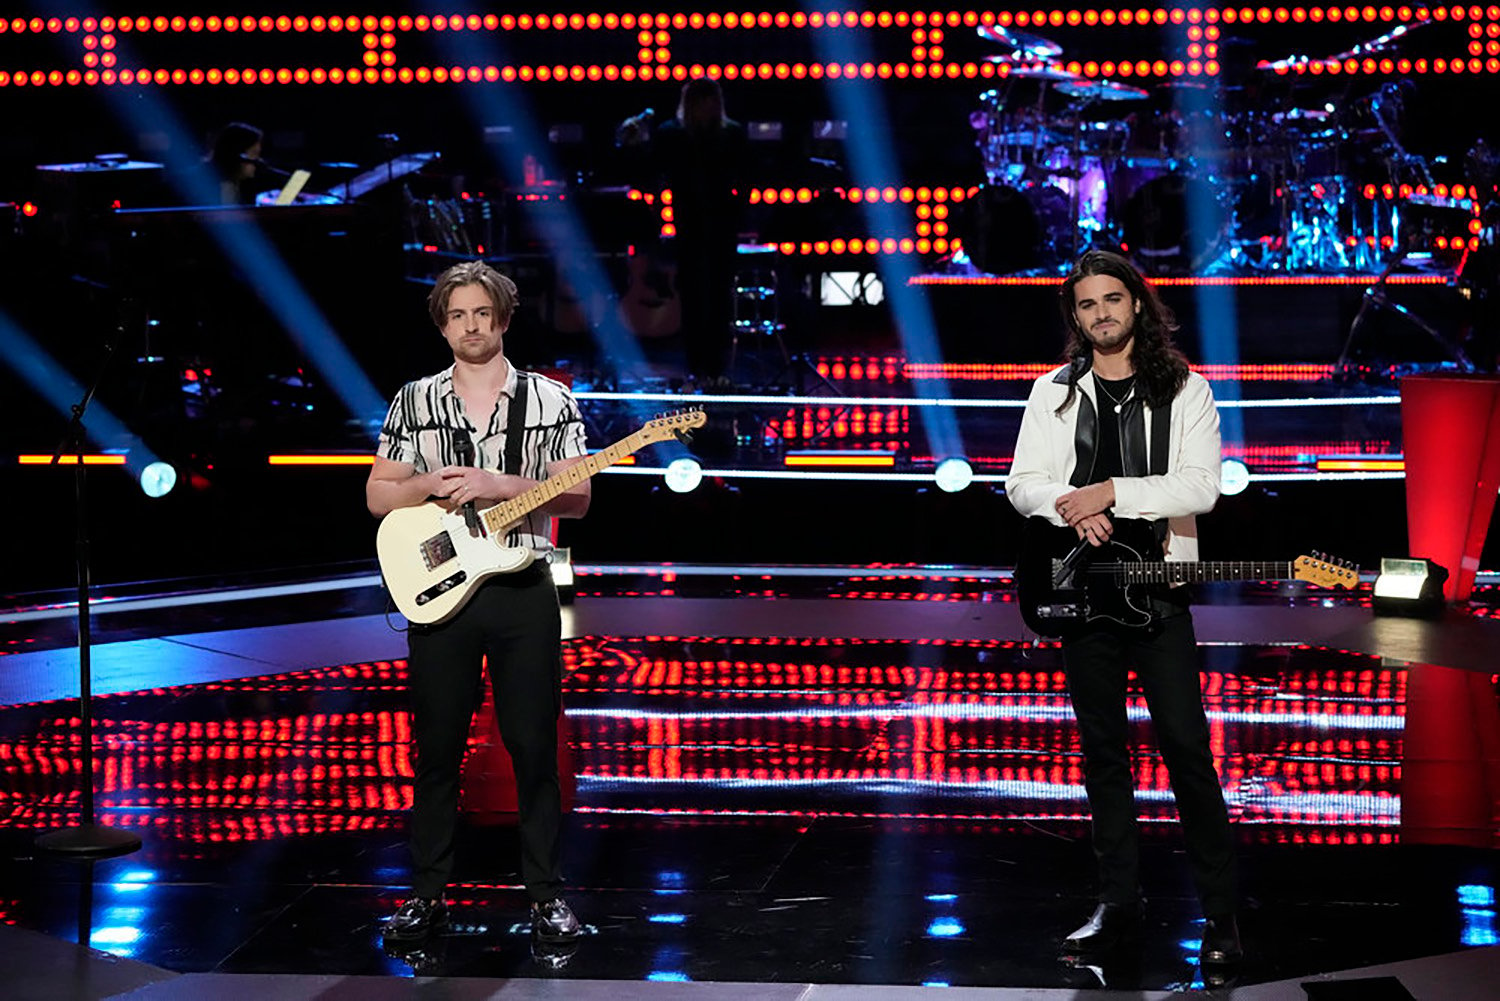 Chavon Rogers and David Vogel stand on stage after performing on The Voice Season 21 Episode 7, the Battles Premiere.